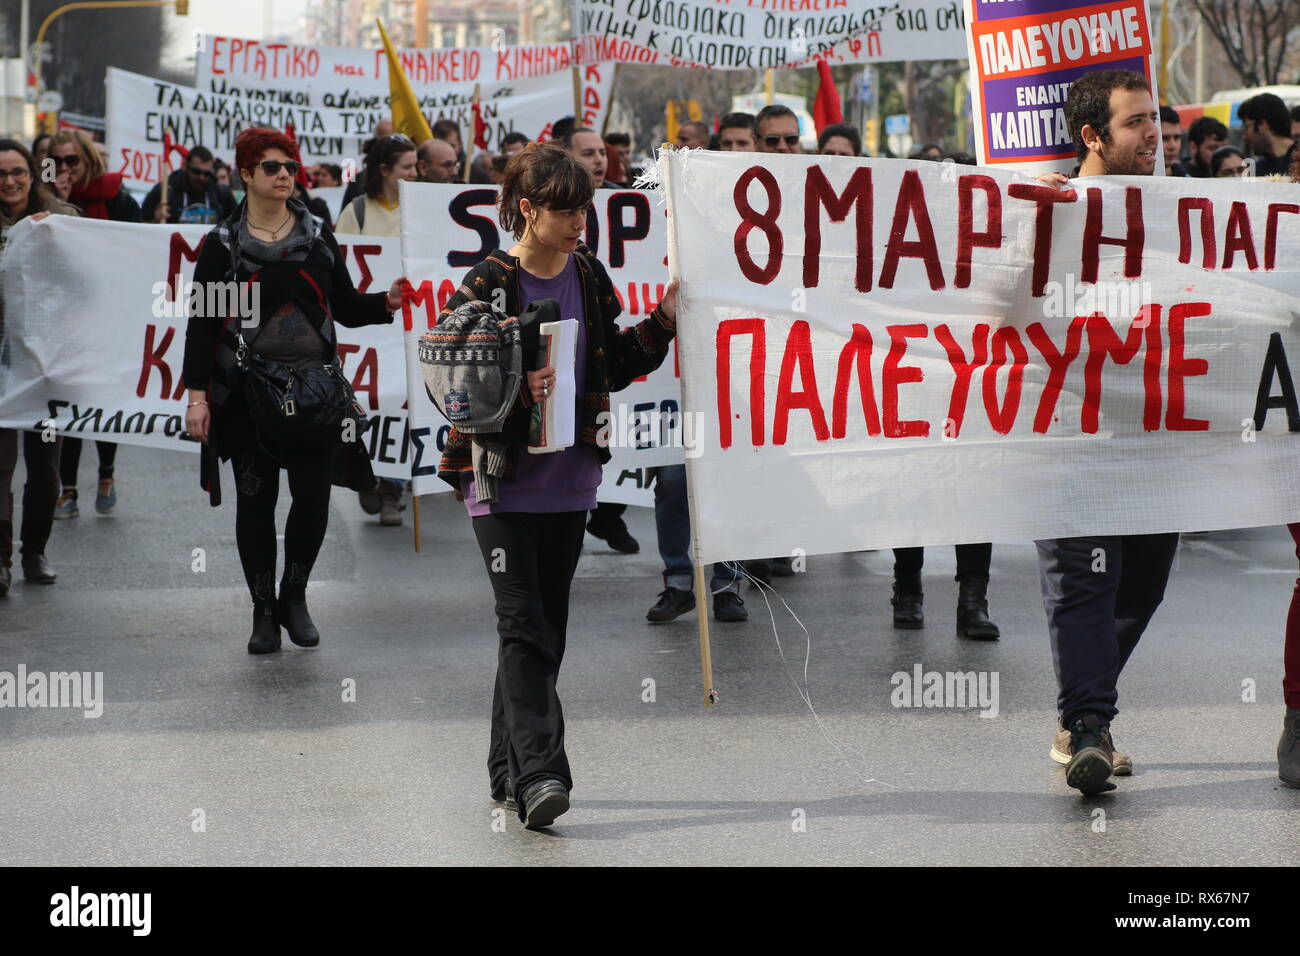 Thessaloniki, Greece, 8th March 2019. People hold banners as they take part in a rally to mark International Women's Day in the northern Greek port city of Thessaloniki. Credit : Orhan Tsolak / Alamy Live News Stock Photo